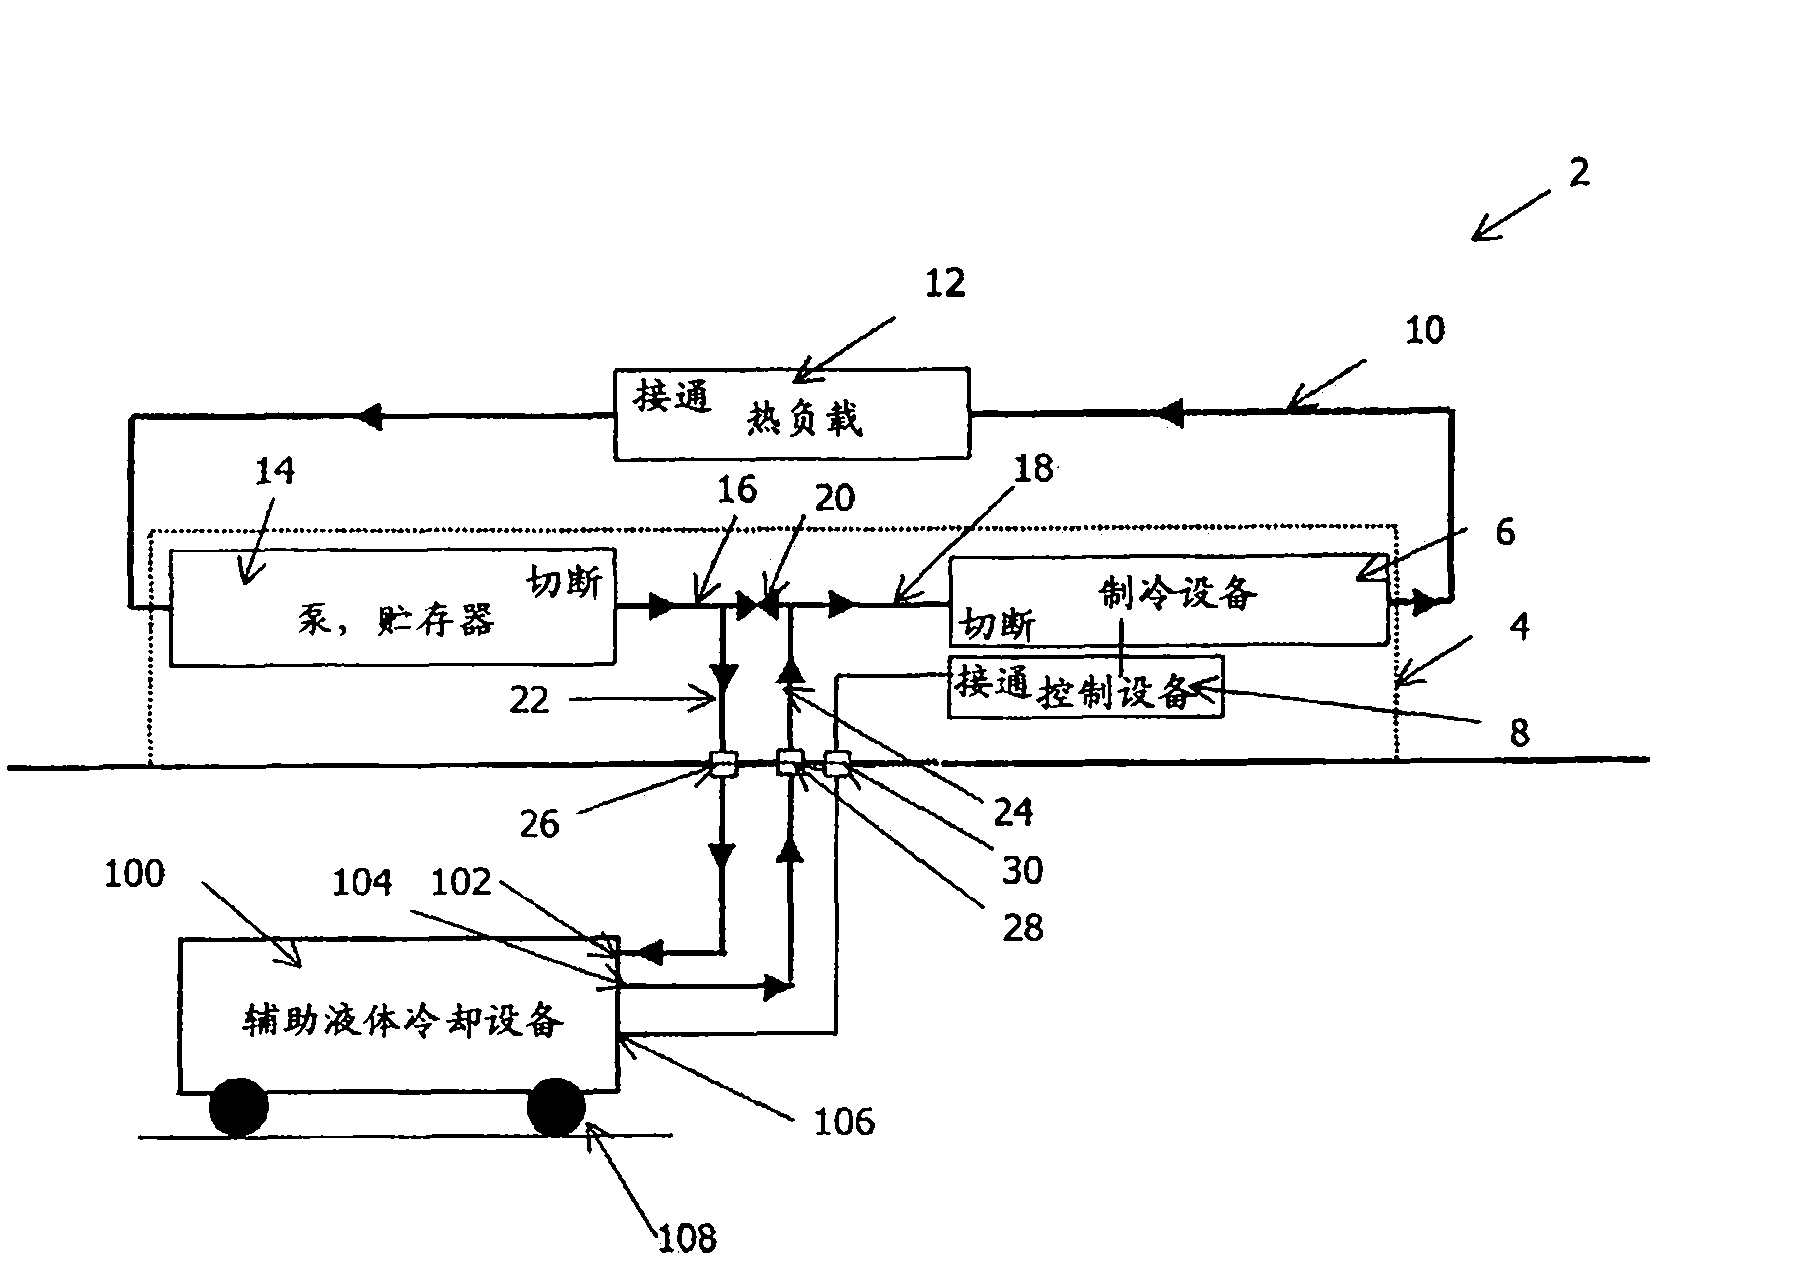 Auxiliary cooling device for connection to aircraft liquid cooling system